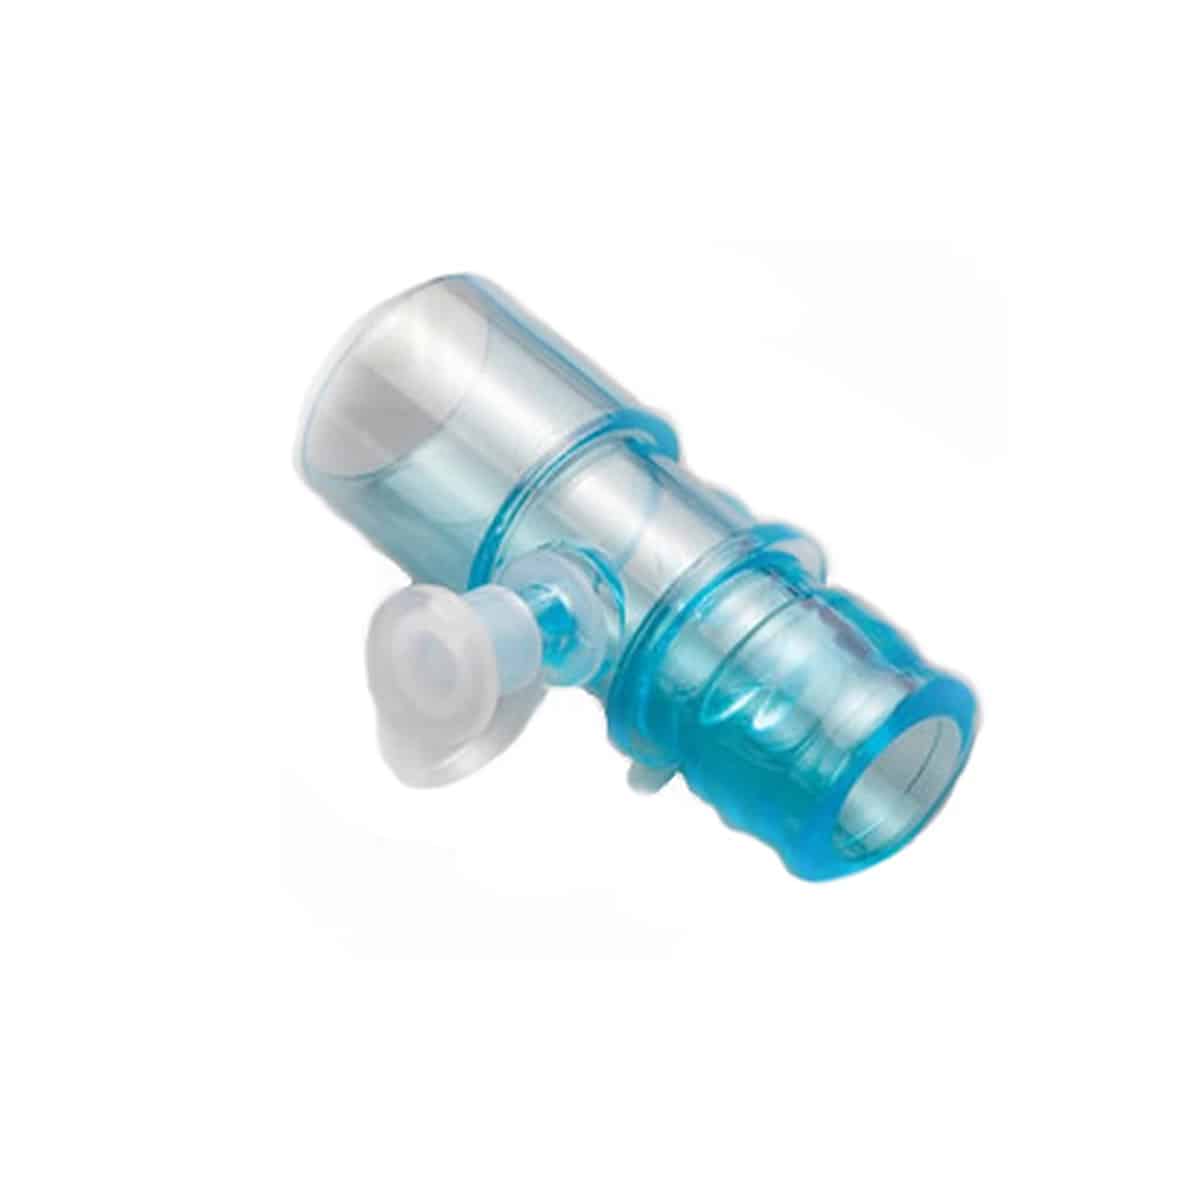 Featured image for “ResMed Sideport Oxygen Connector”